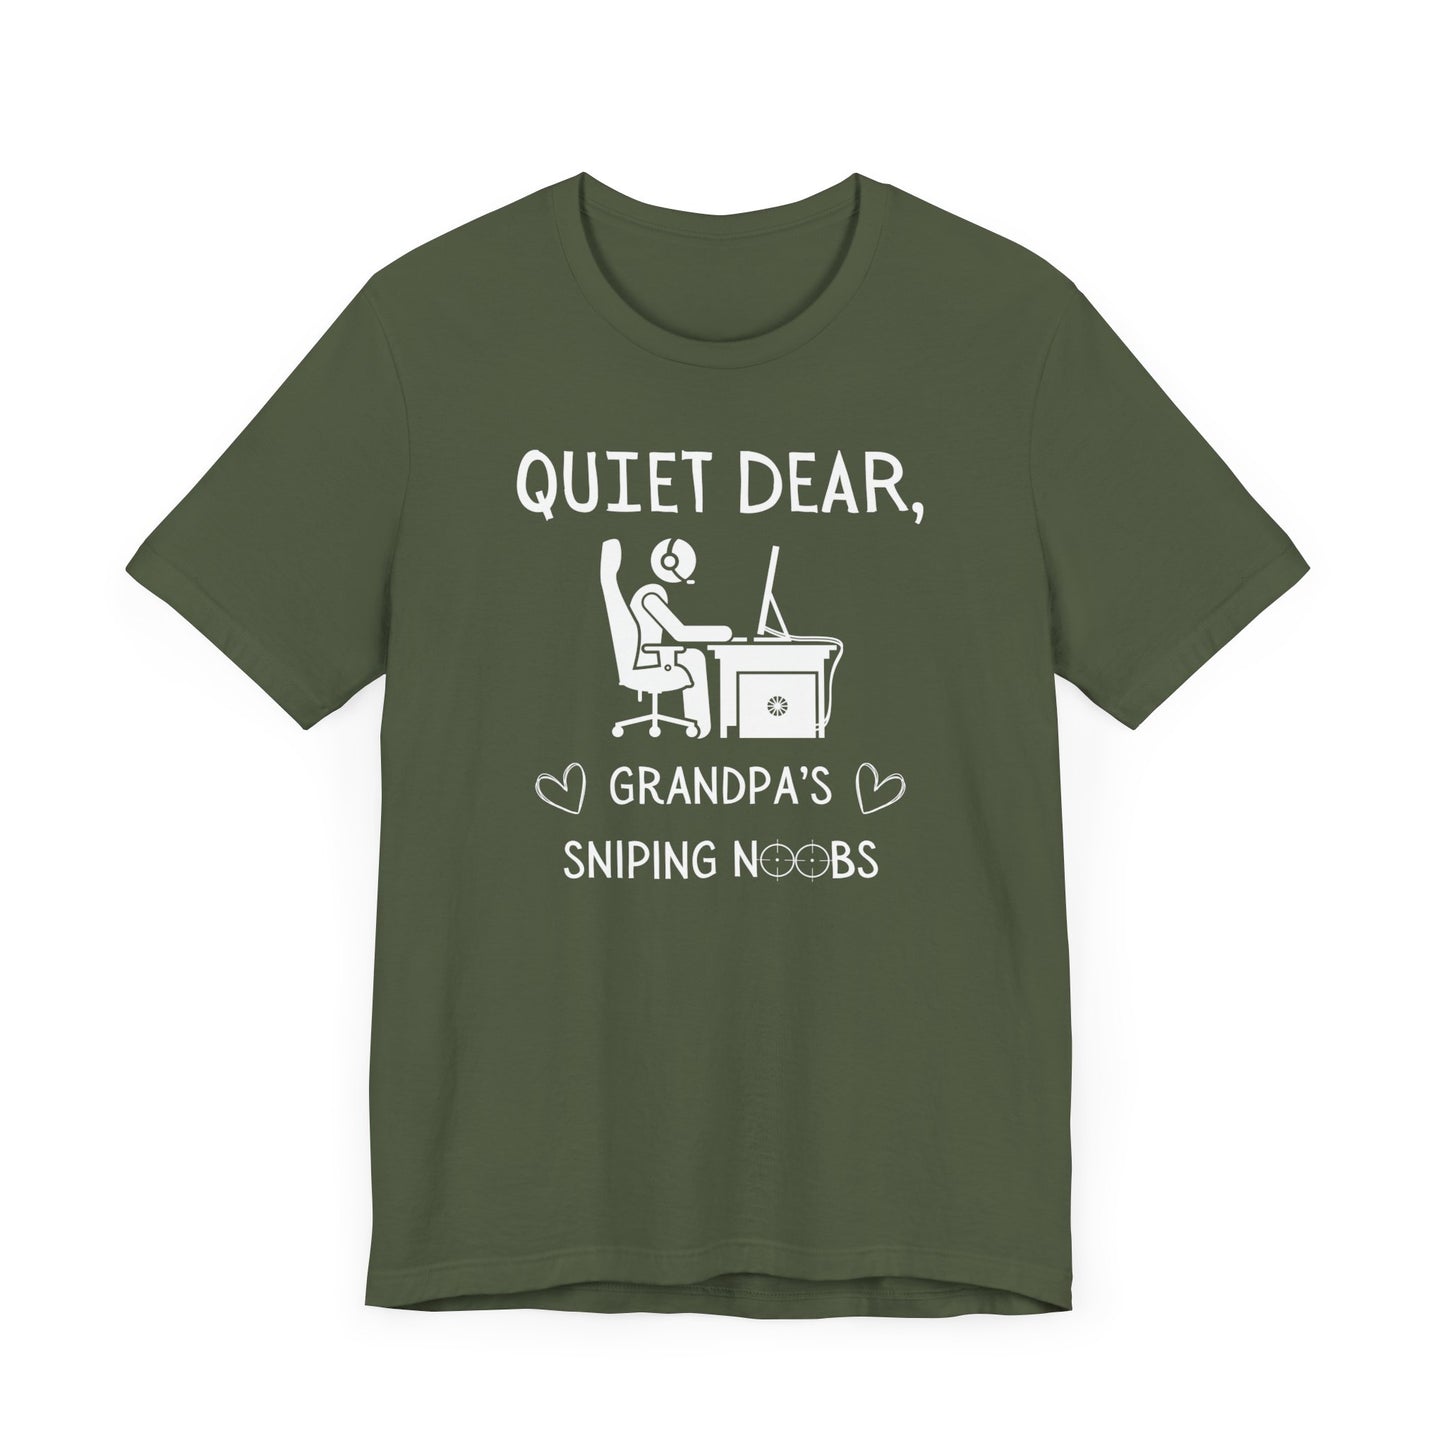 A flat image of a military green t-shirt that reads Quiet Dear, Grandpa's Sniping Noobs in white text. The lower text is framed by two hearts, and the O's are in the shape of sniper scopes. In the center of the shirt is an image of a person at a desk with a gaming PC.